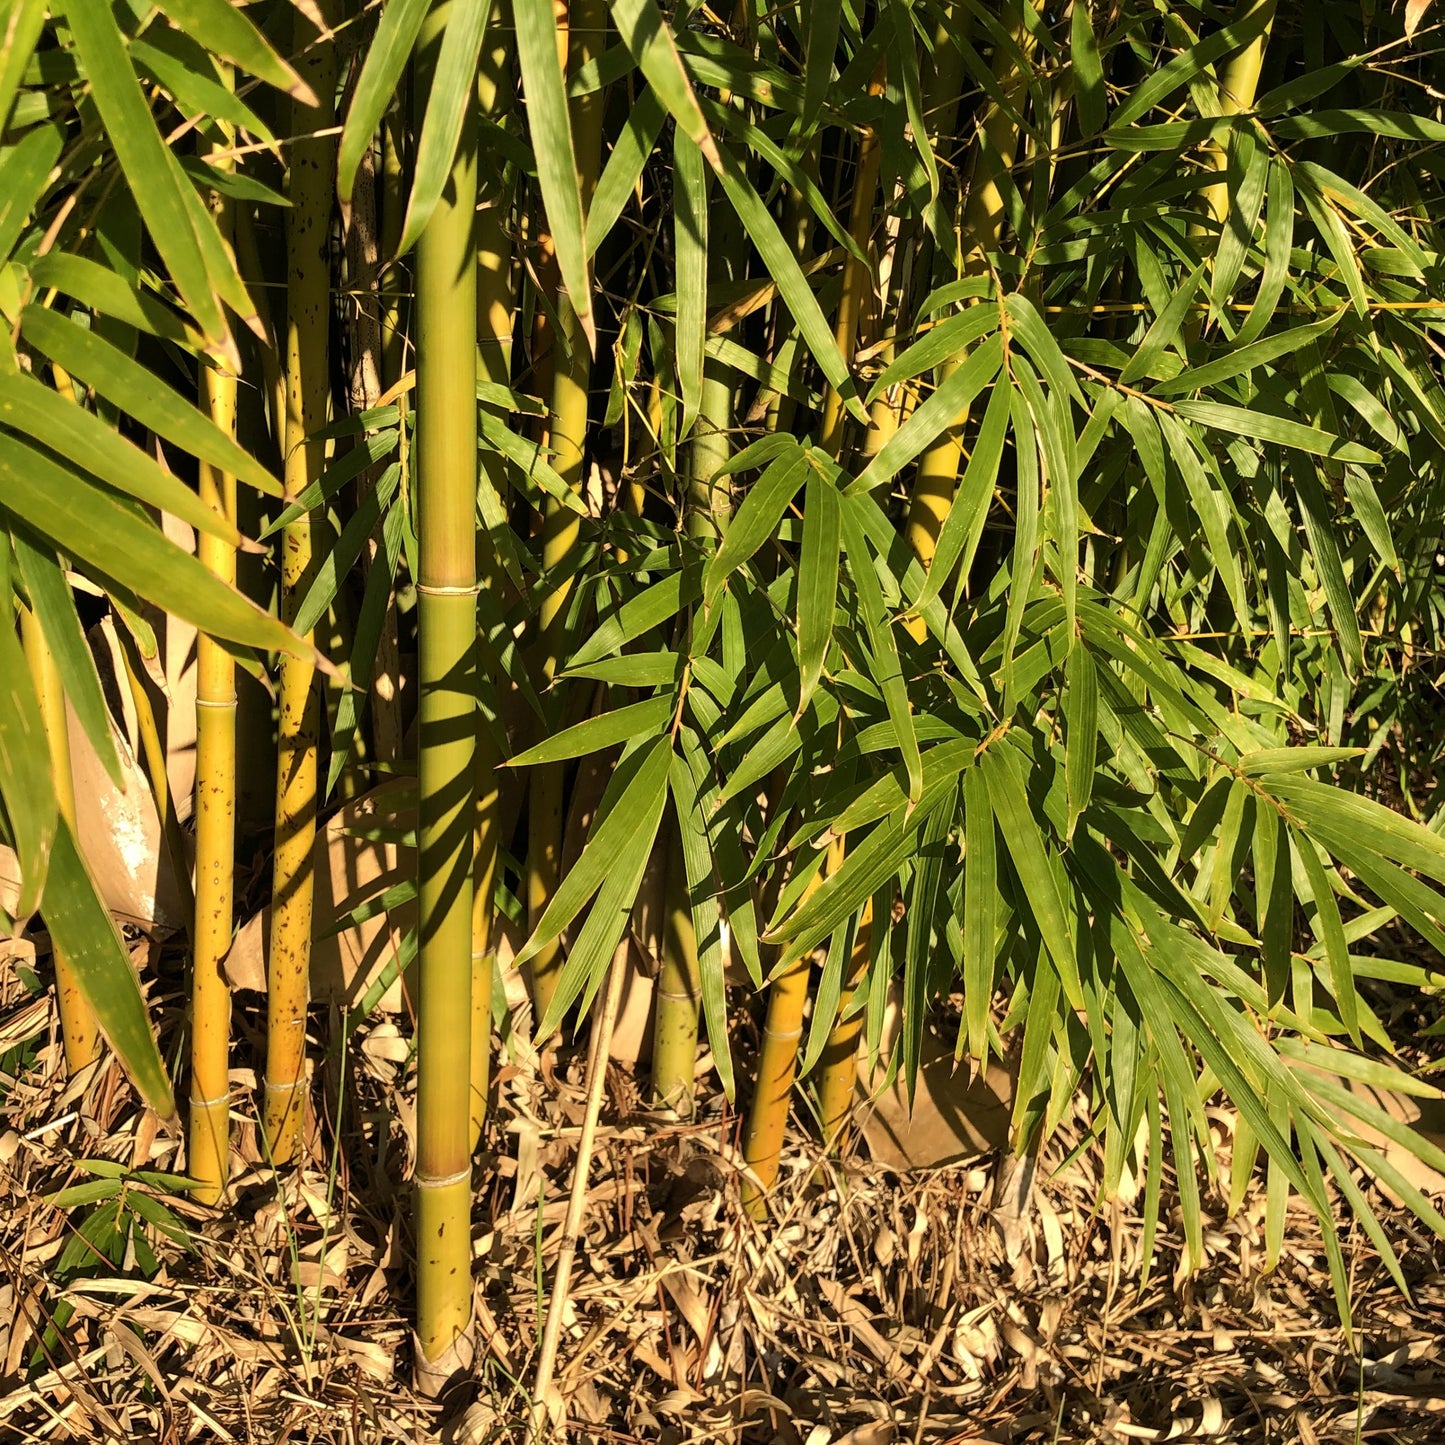 Bamboo canes and foliage